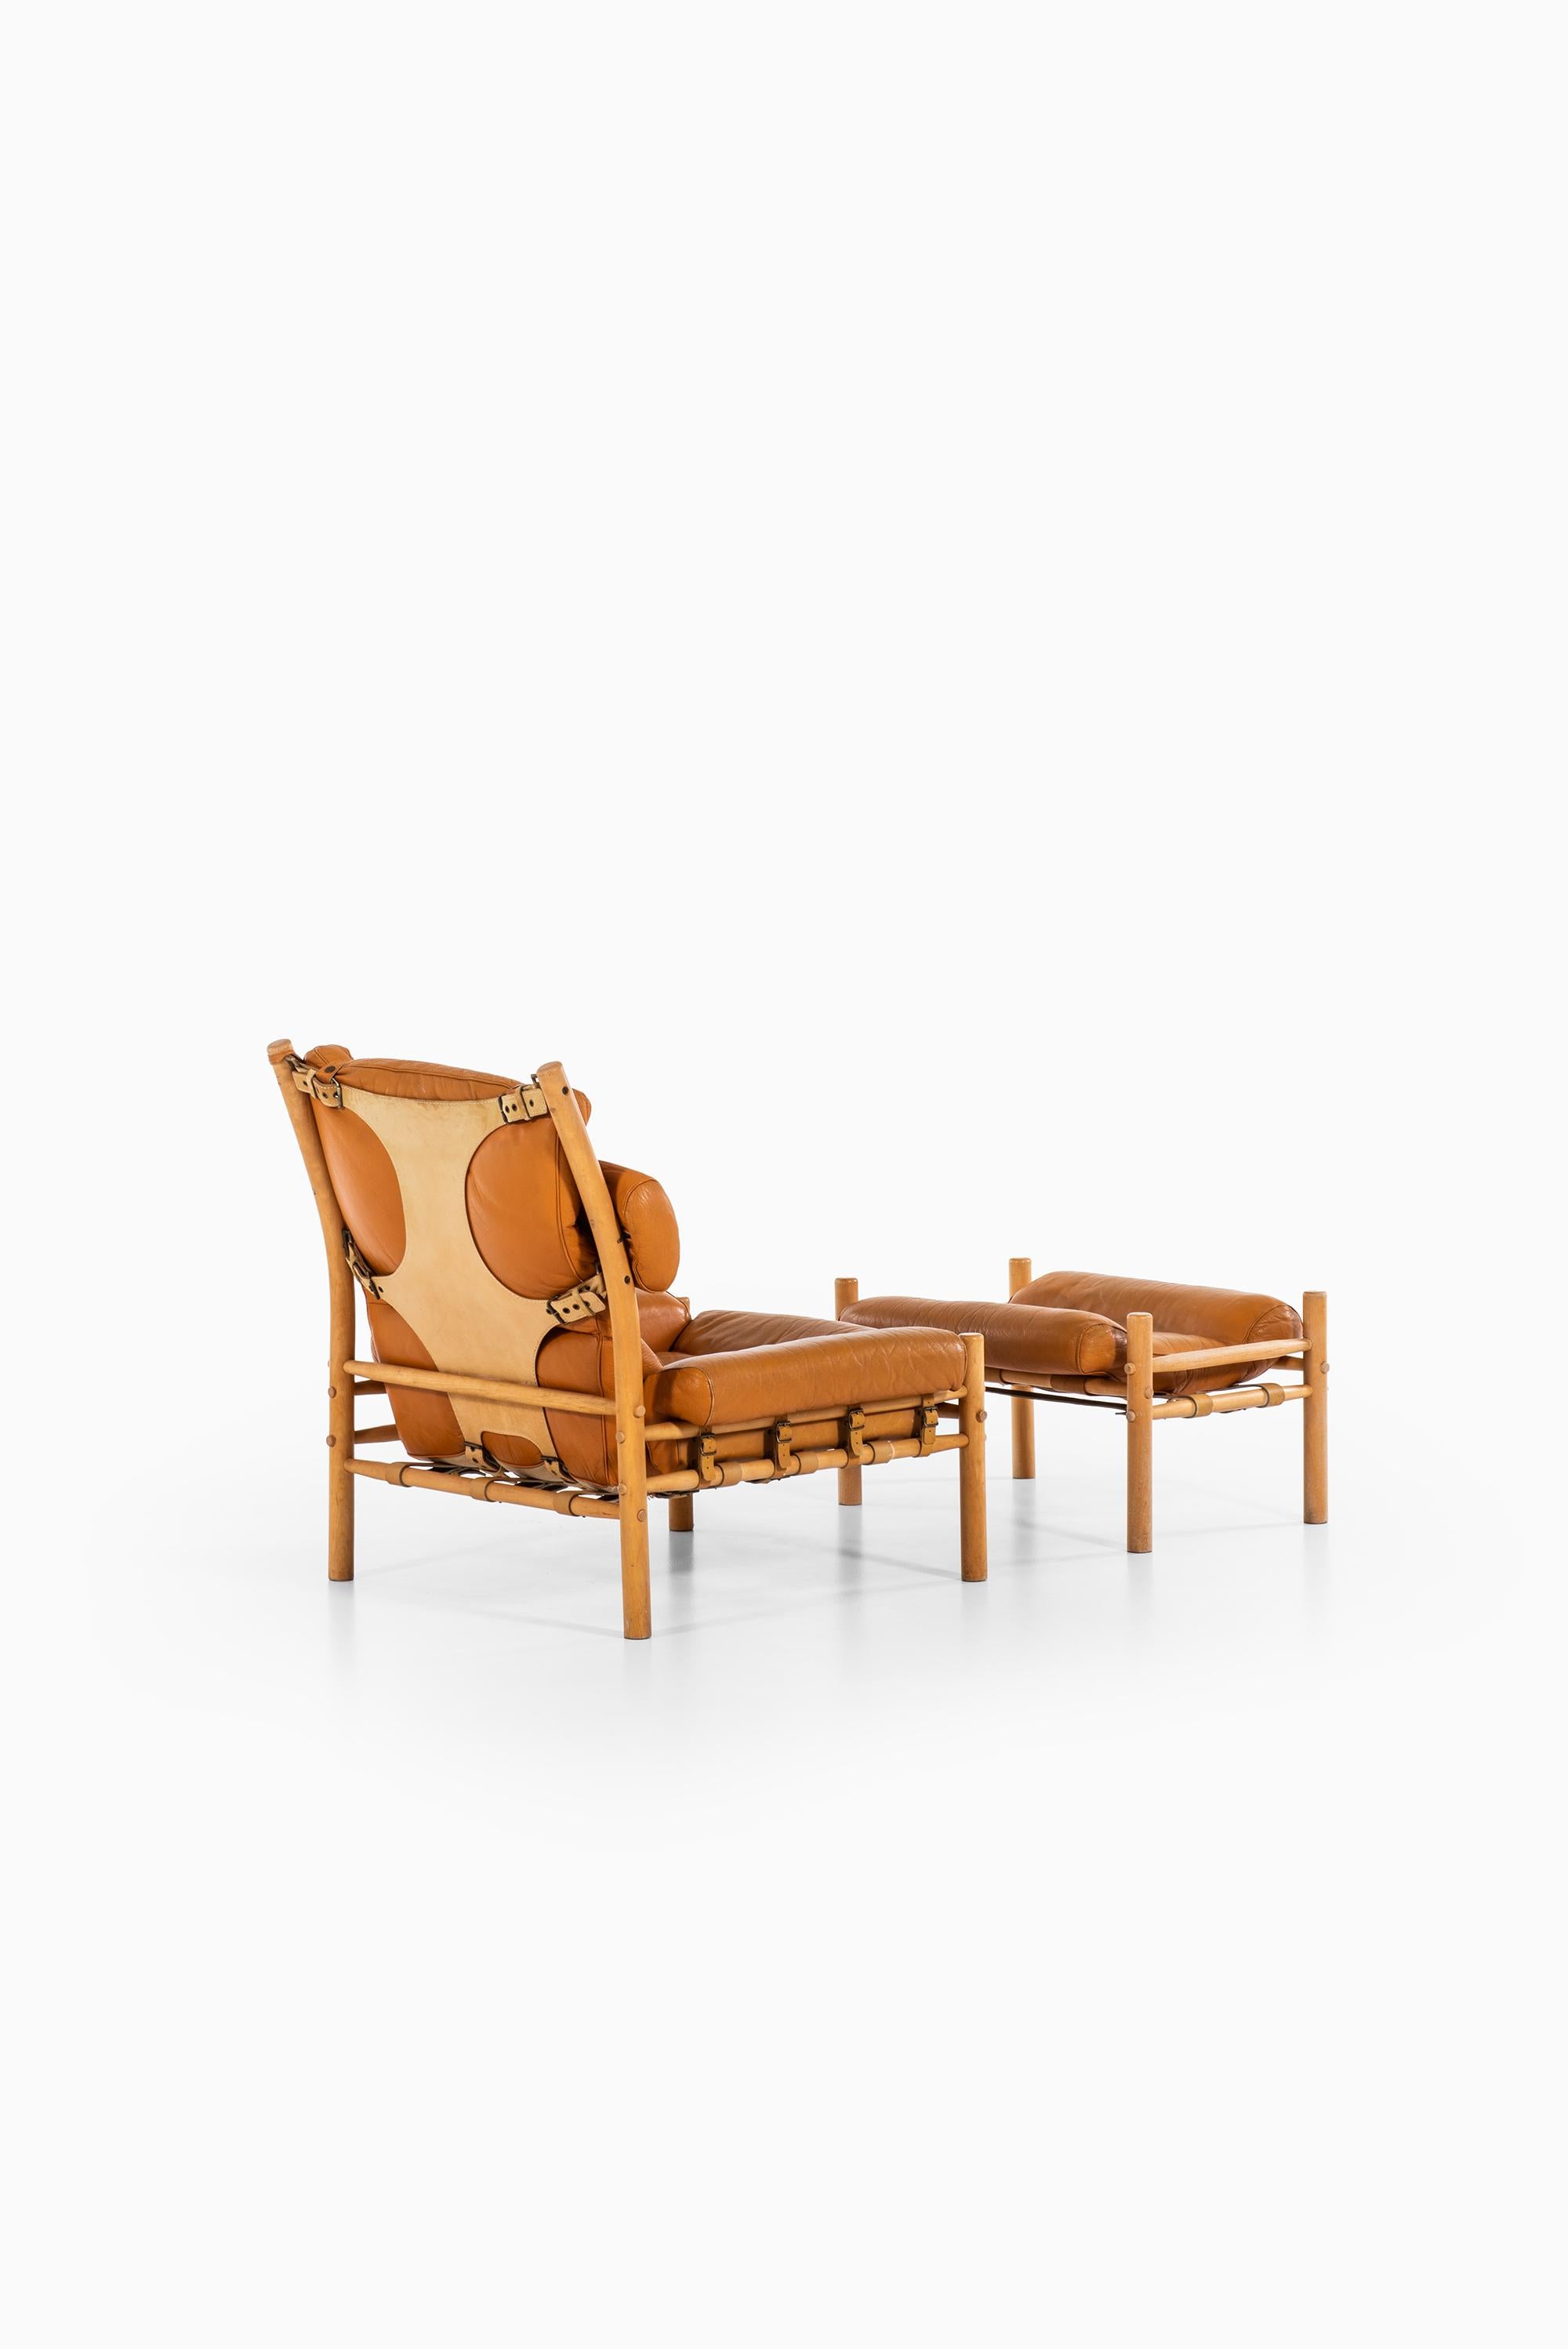 Mid-20th Century Arne Norell Inca Easy Chairs with Stools Produced by Arne Norell AB in Sweden